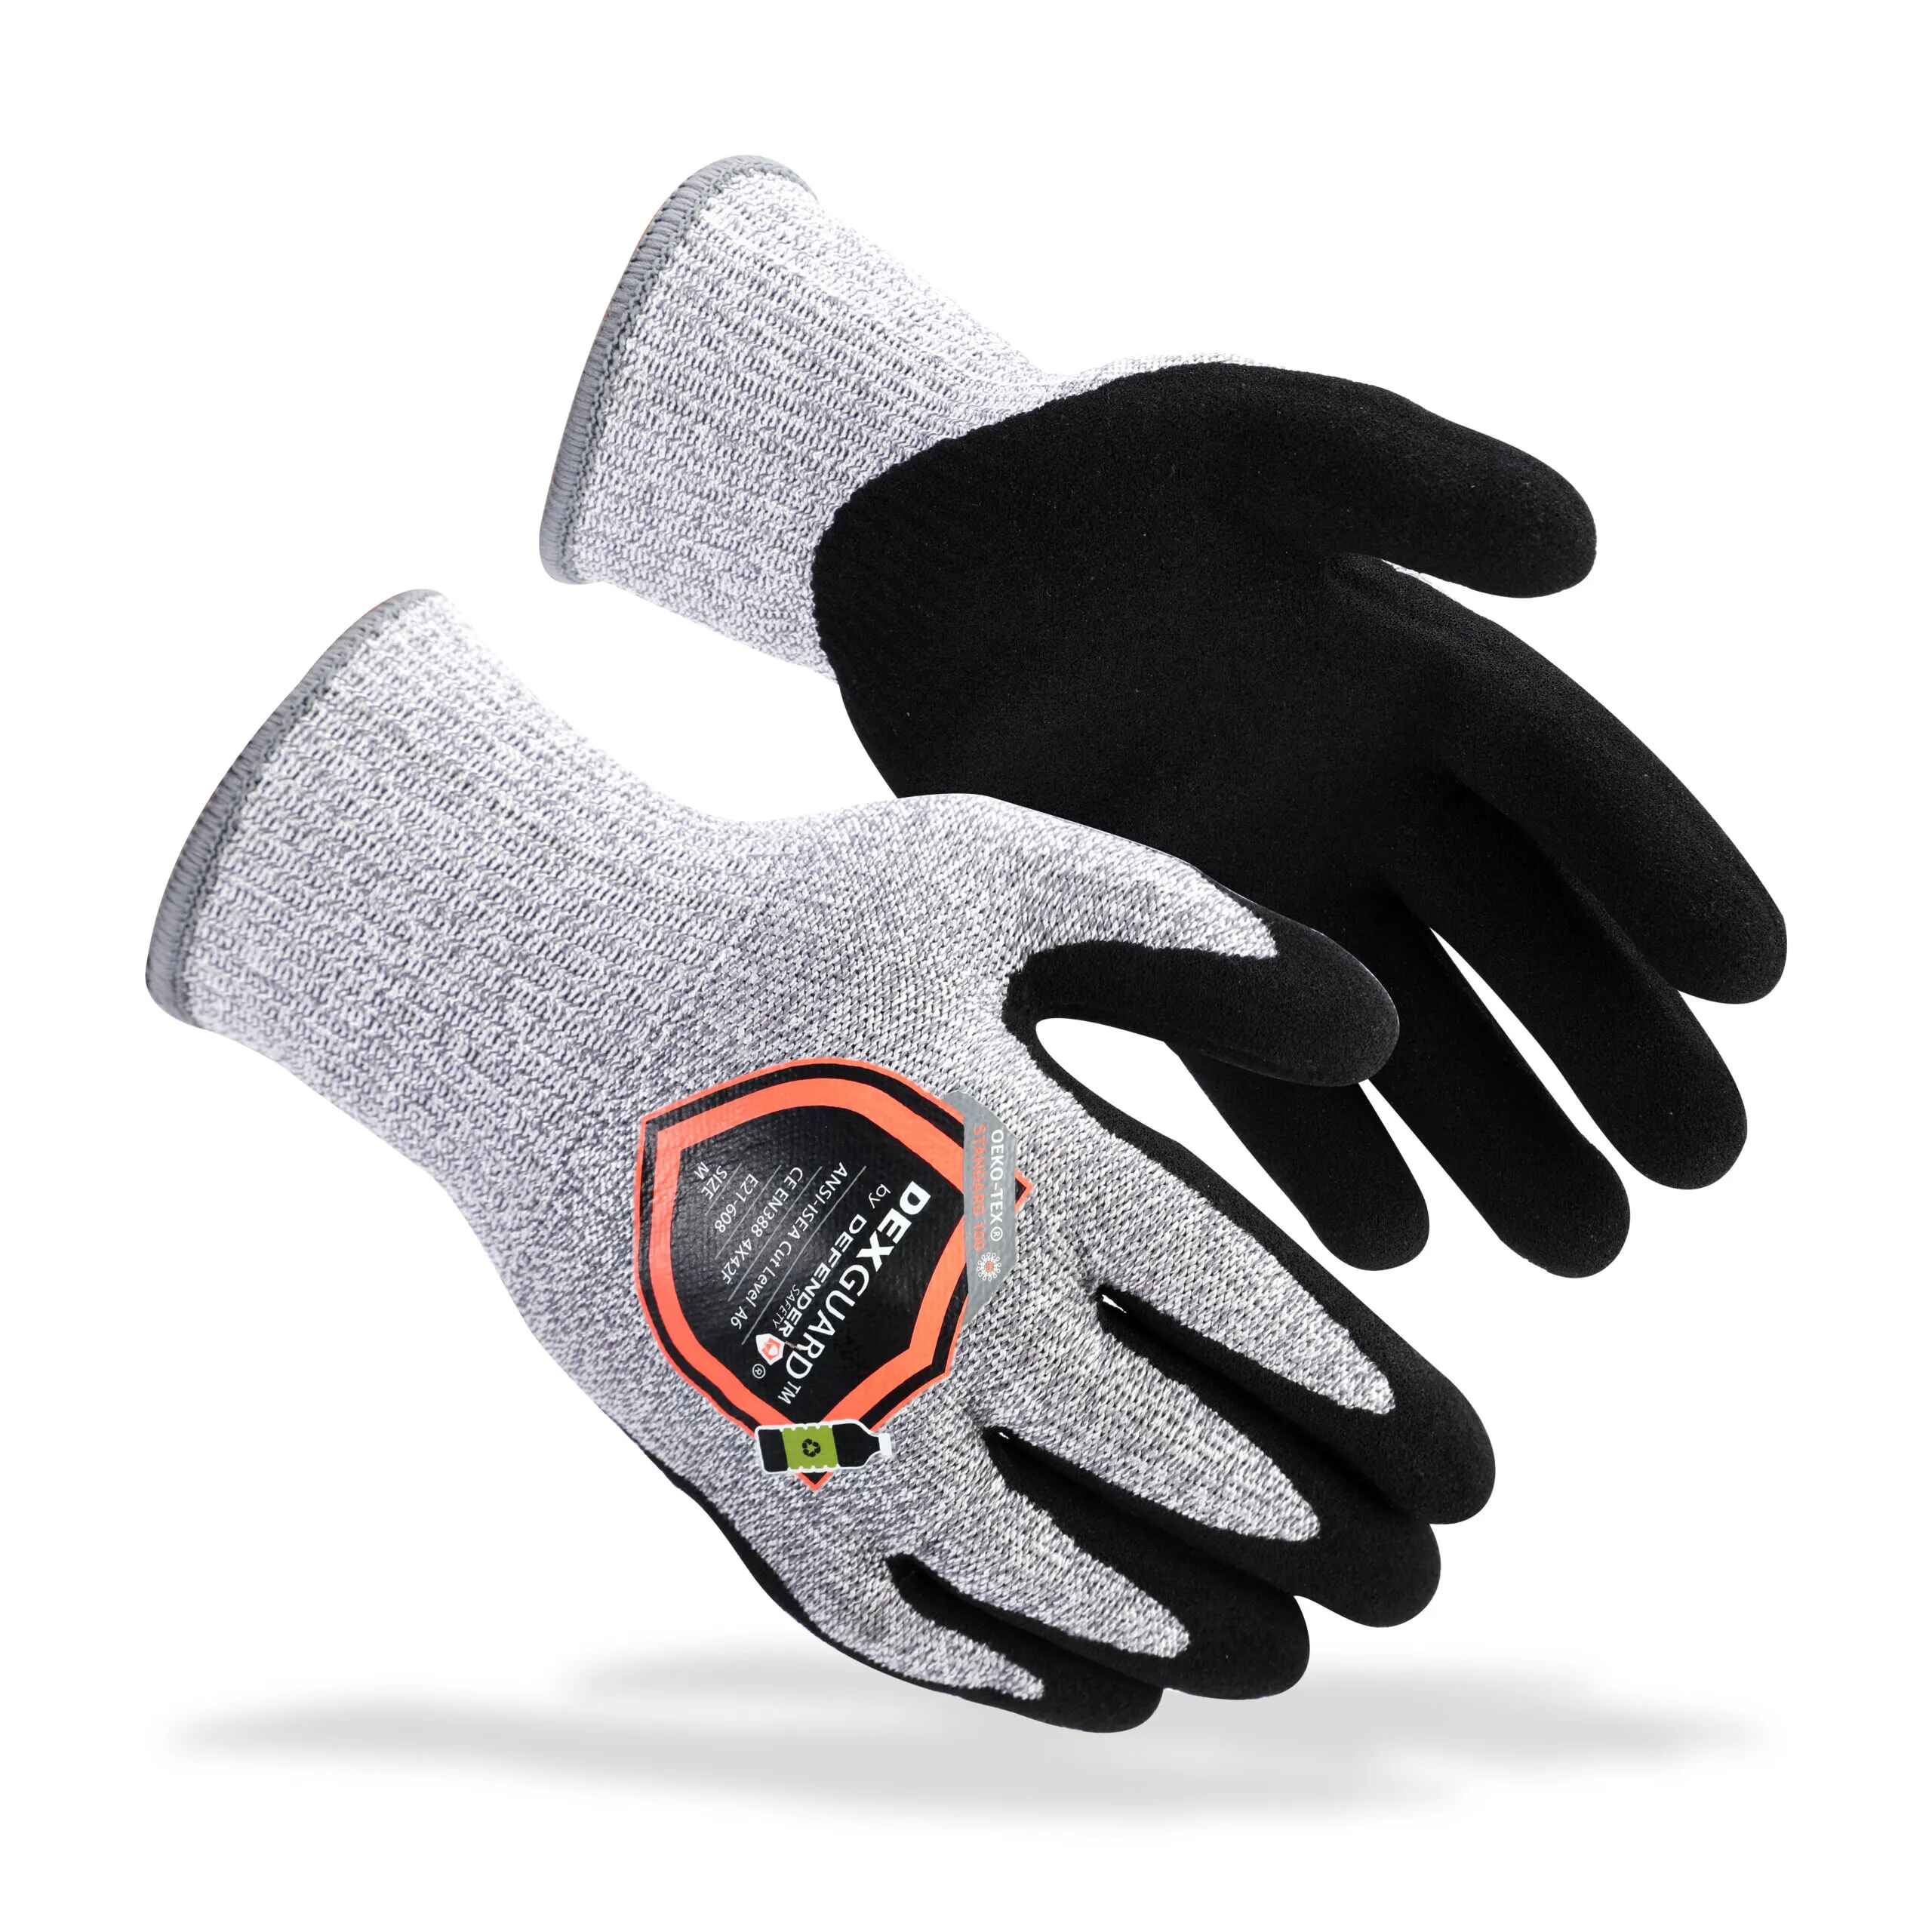 https://defendersafety.com/cdn/shop/products/dexguard-a6-cut-gloves-level-4-abrasion-resistant-textured-nitrile-coating-touch-screen-compatible-577309.jpg?v=1690825177&width=2560